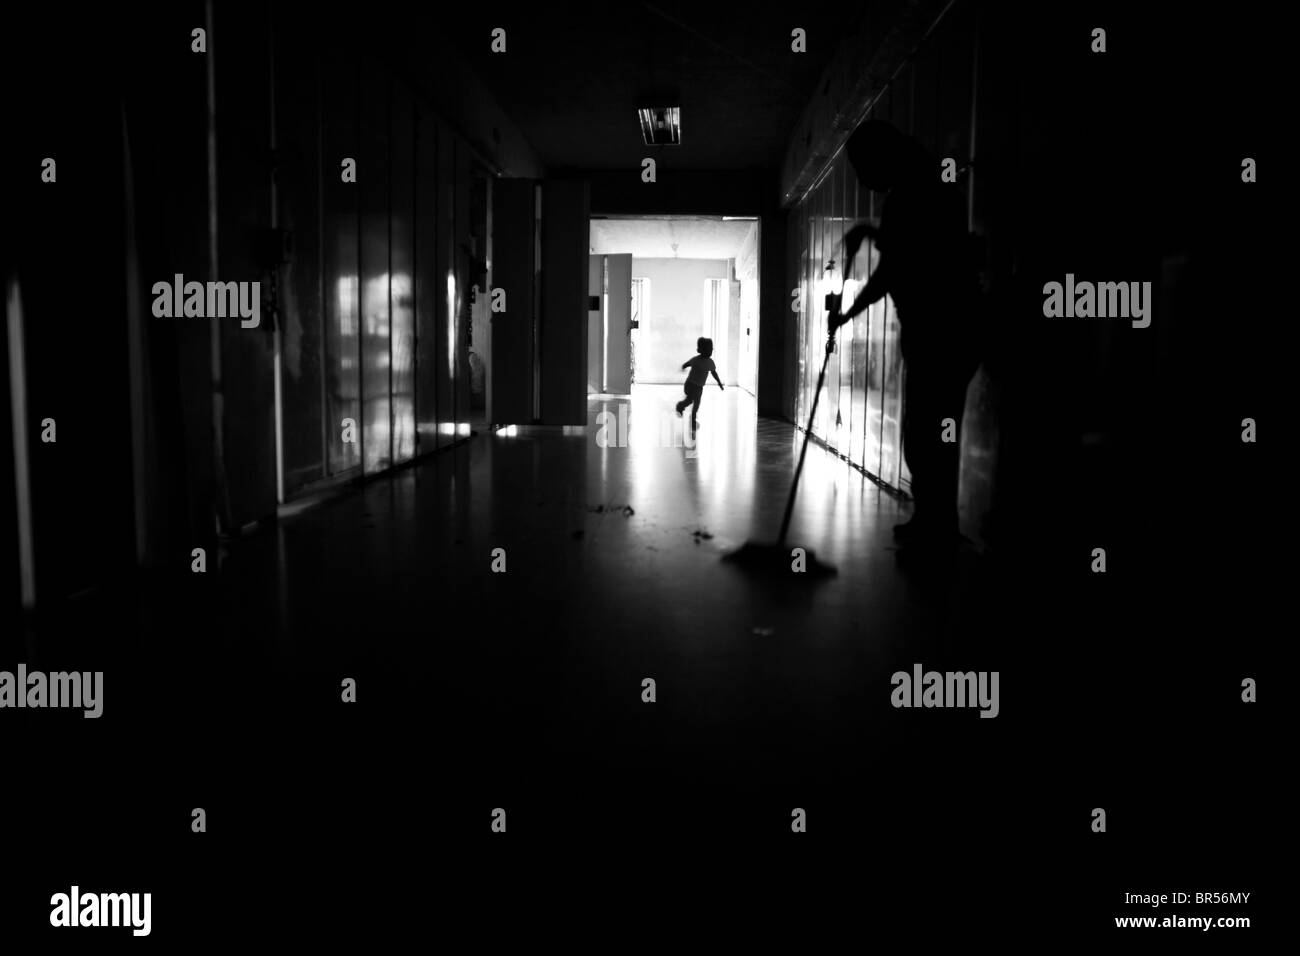 A child plays in the hallway inside a prison in Mexico D.F. Stock Photo